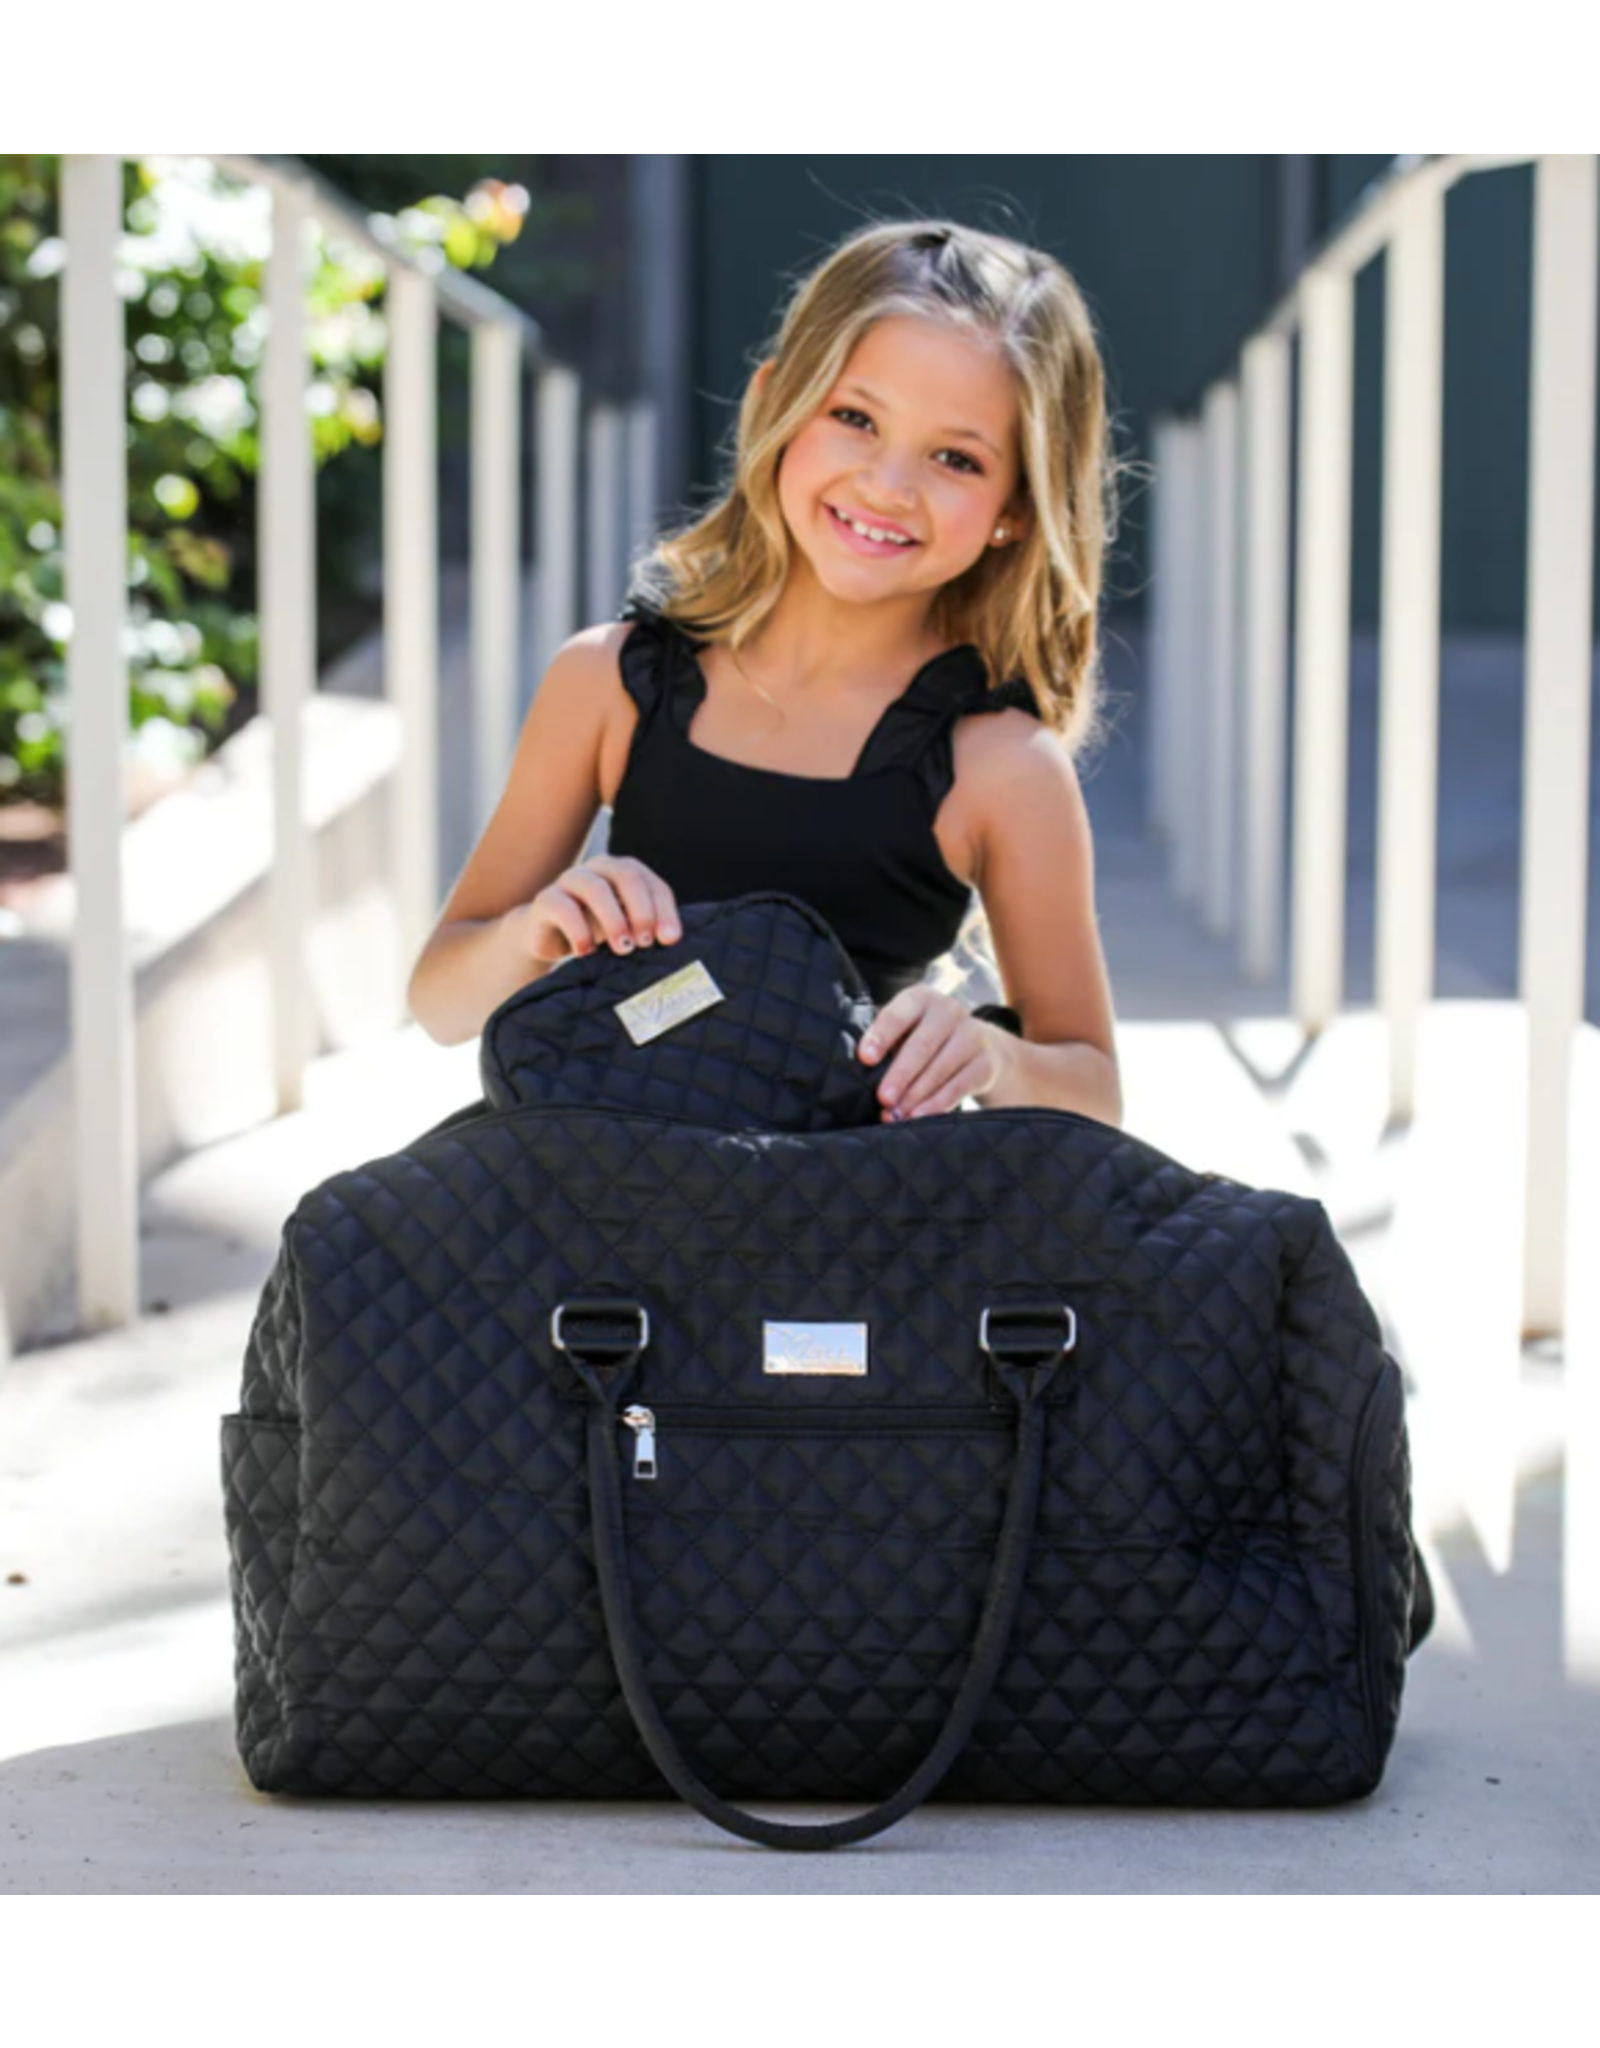 Chic Ballet On the go duffle bag